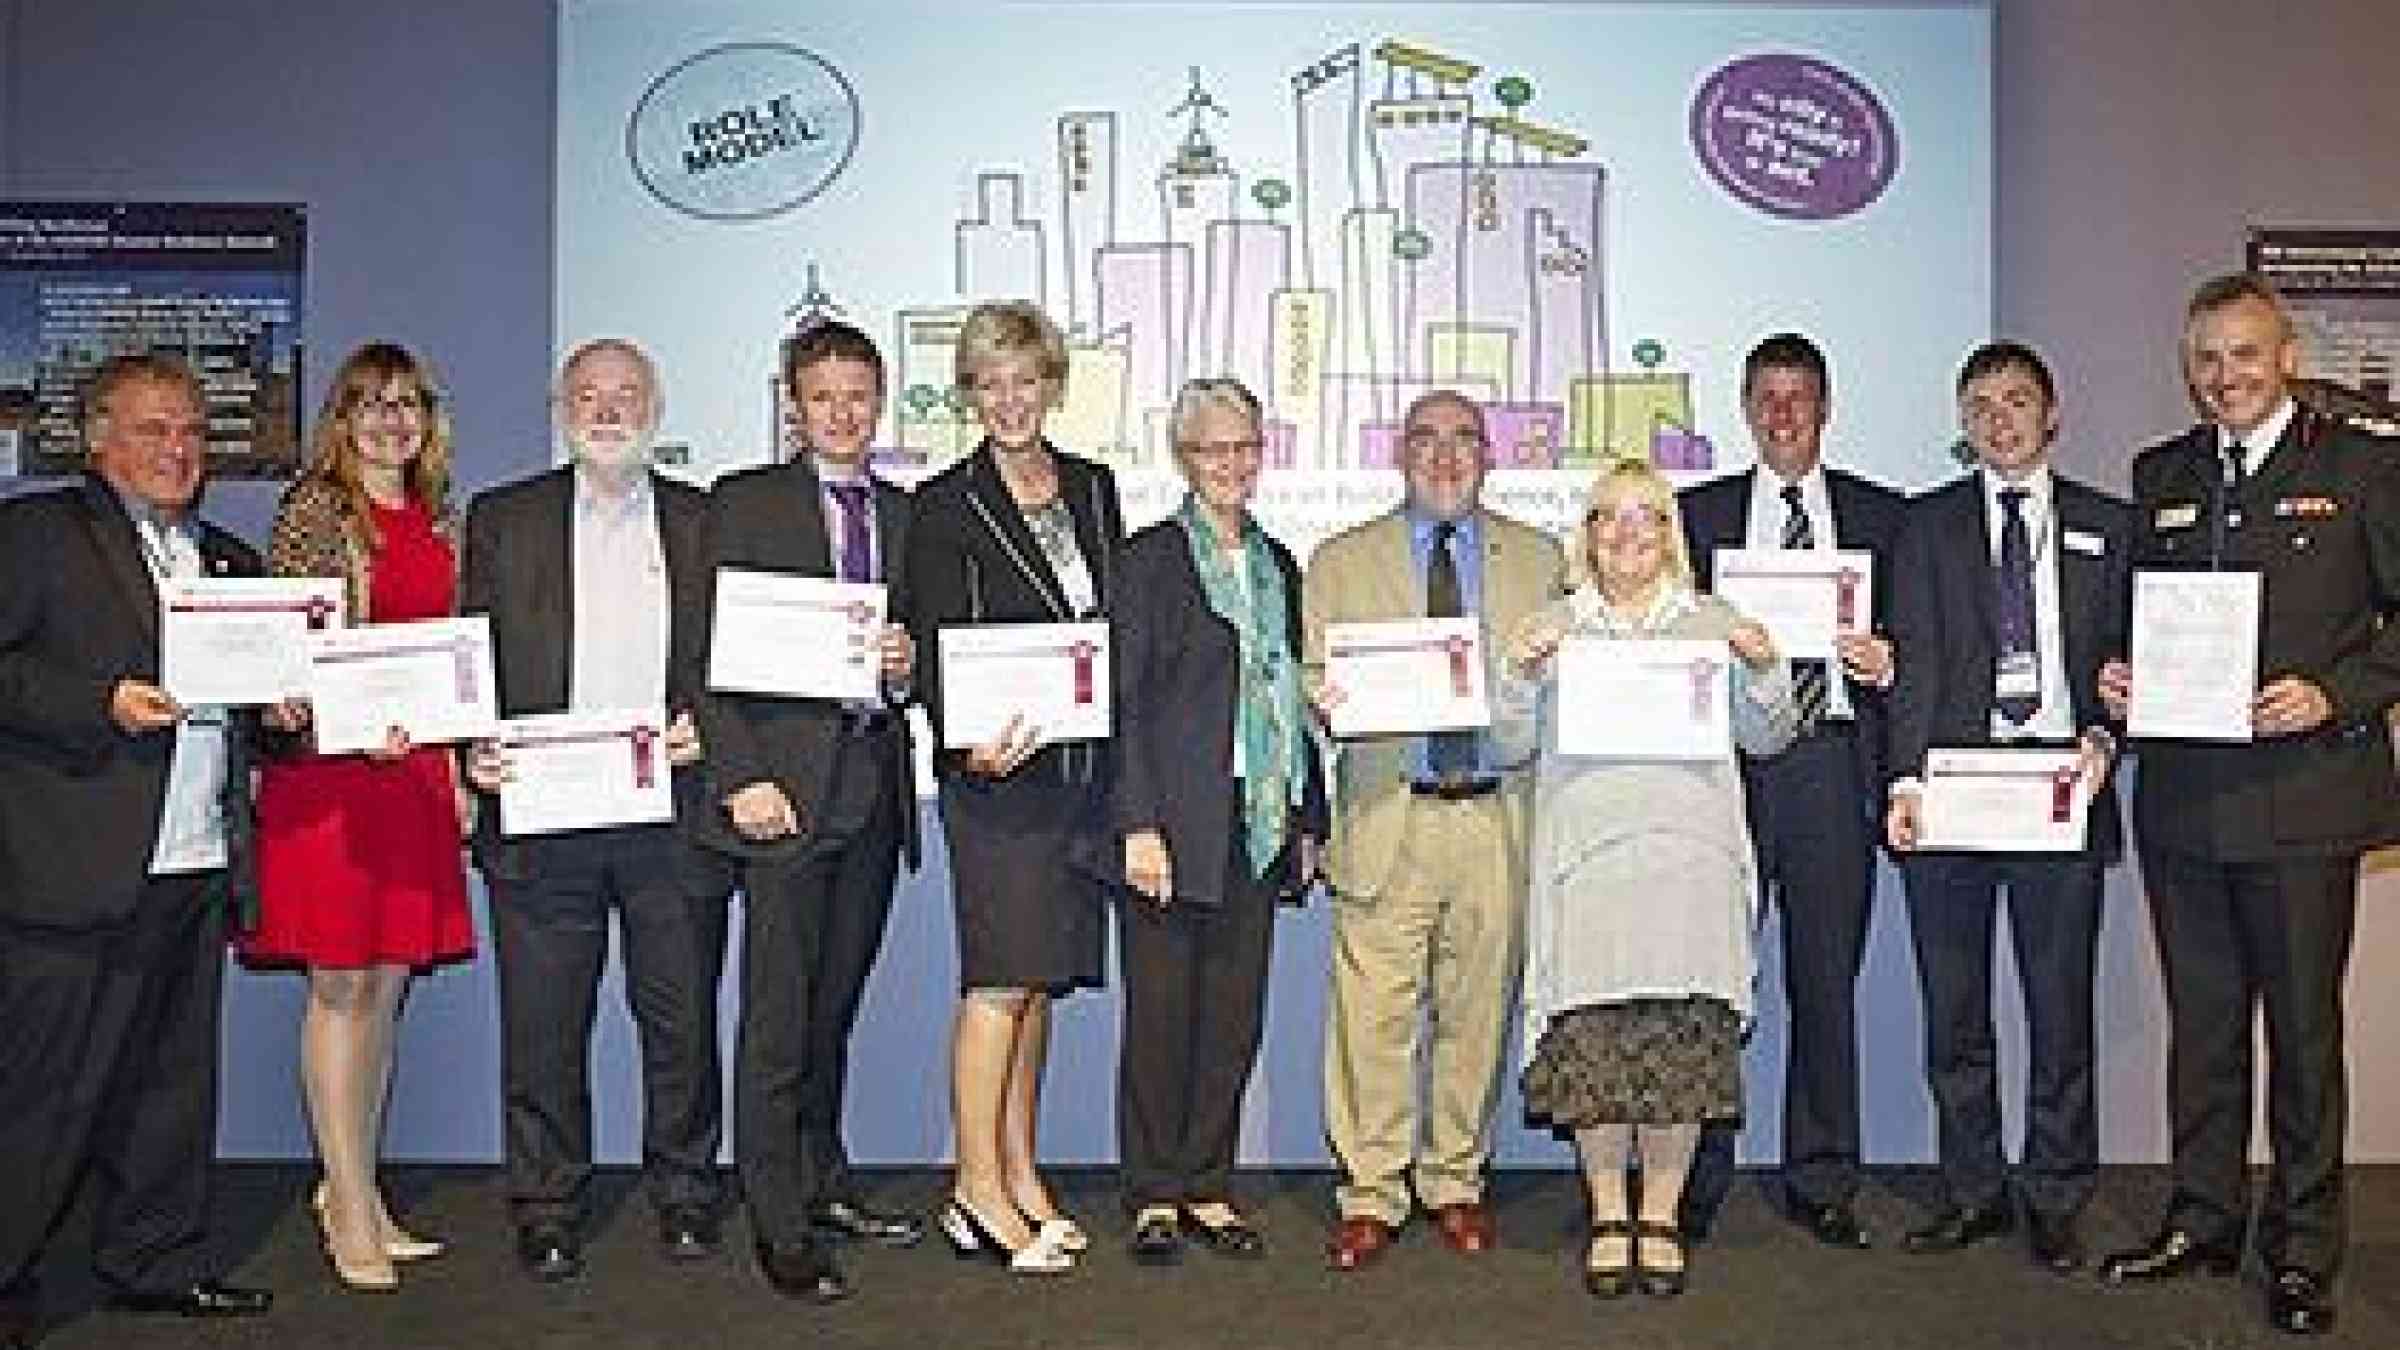 UNISDR chief Margareta Wahlstrom with representatives from the ten boroughs of Greater Manchester shortly after joining the Making Cities Resilient Campaign this week: Bolton, Bury, Manchester, Oldham, Rochdale, Salford, Stockport, Tameside, Trafford and Wigan. (Photo: UNISDR)